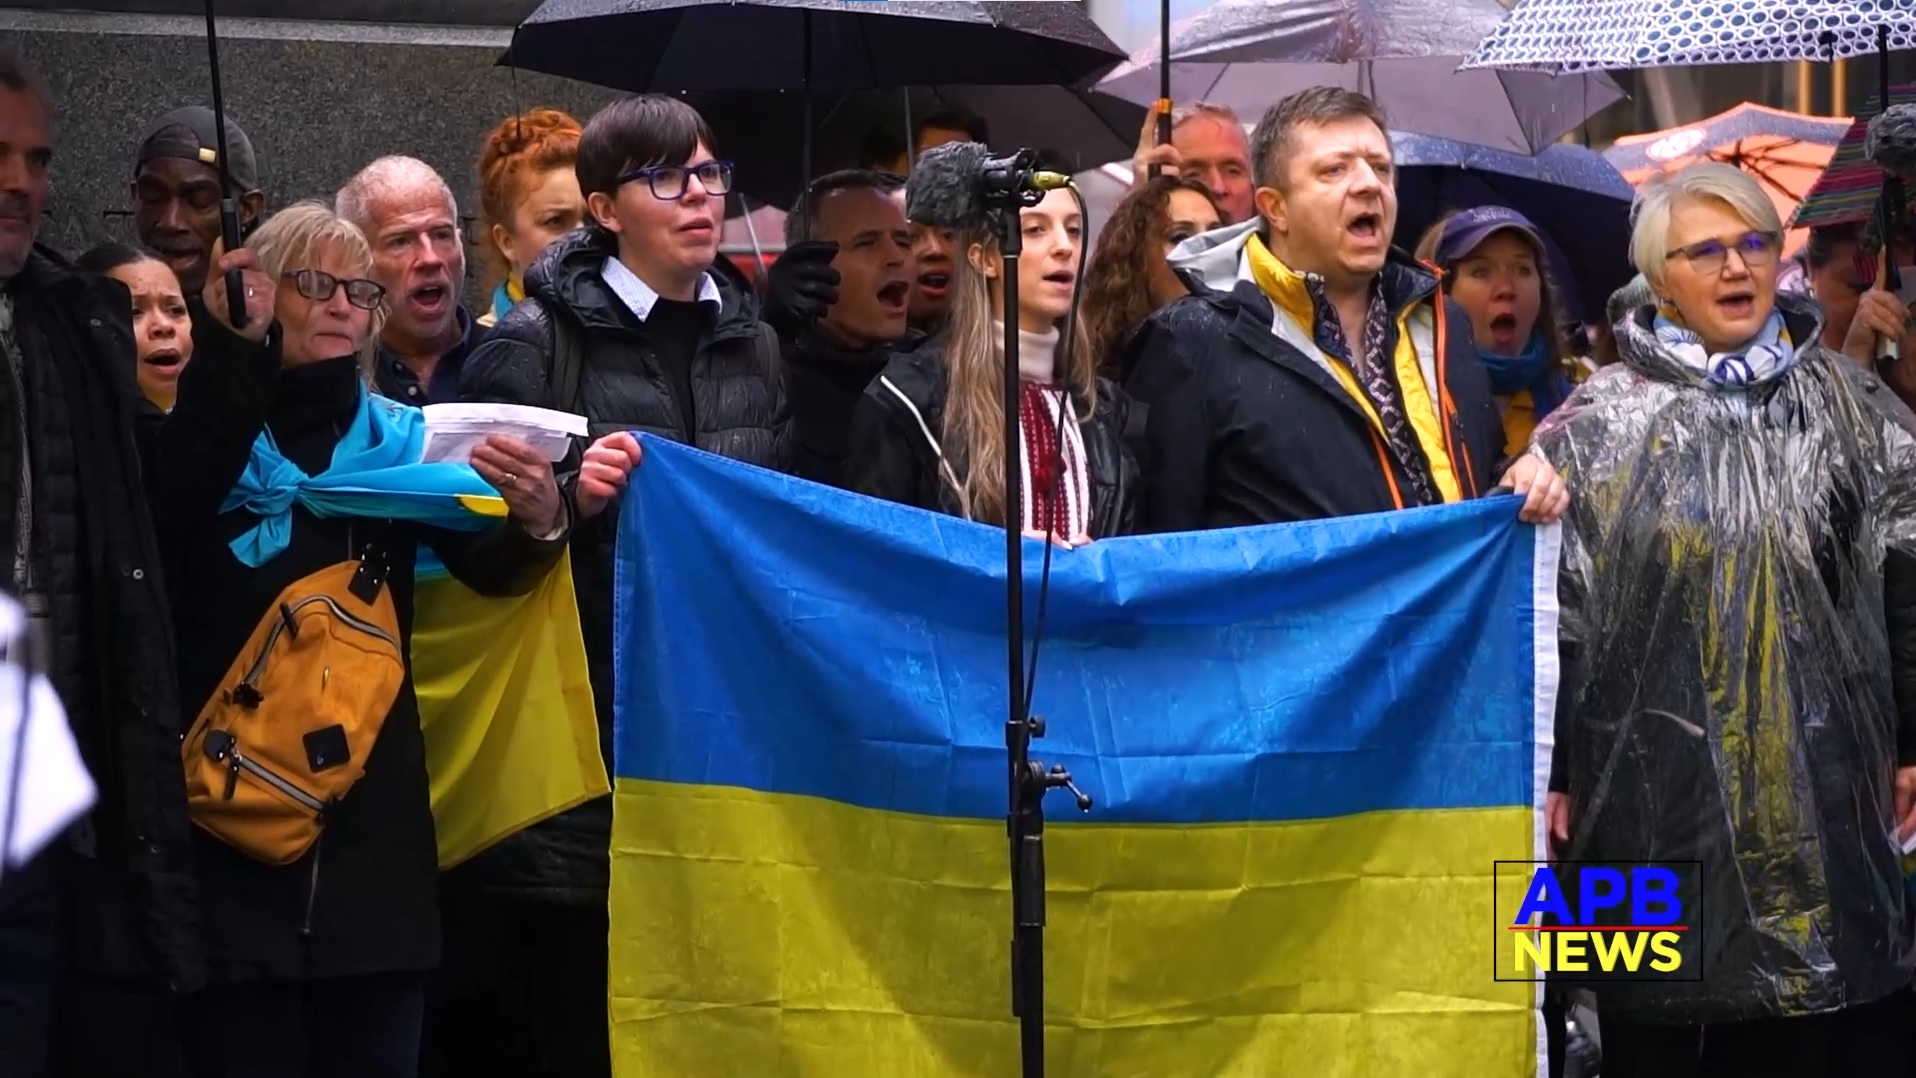 BROADWAY COMMUNITY COMES TOGETHER TO SING ‘DO YOU HEAR THE PEOPLE SING’ FOR UKRAINE IN TIMES SQUARE